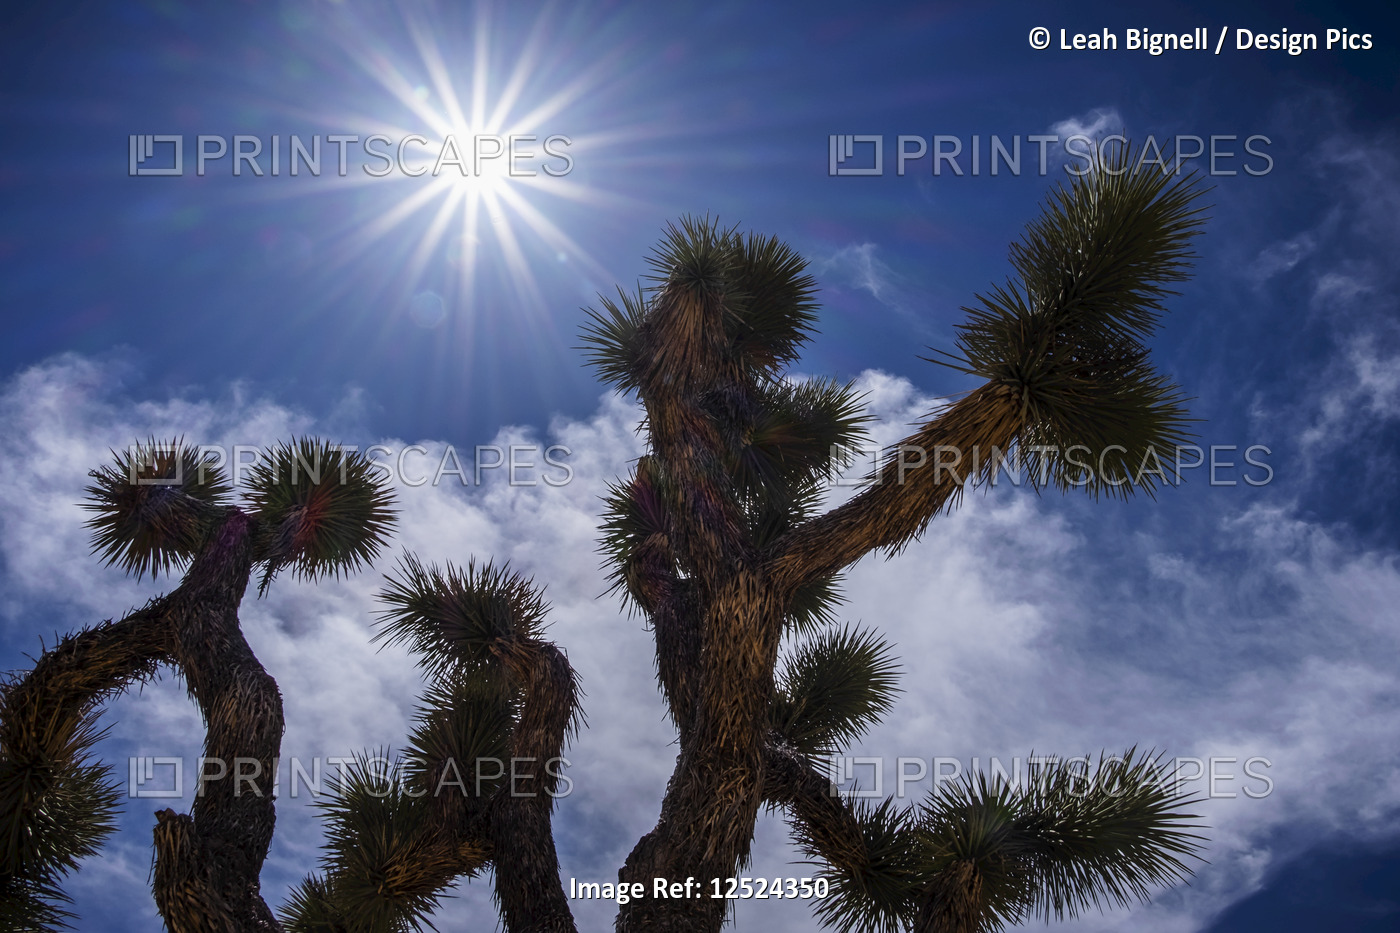 A Yucca brevifolia under a bright sky in Joshua Tree National Park, CA.